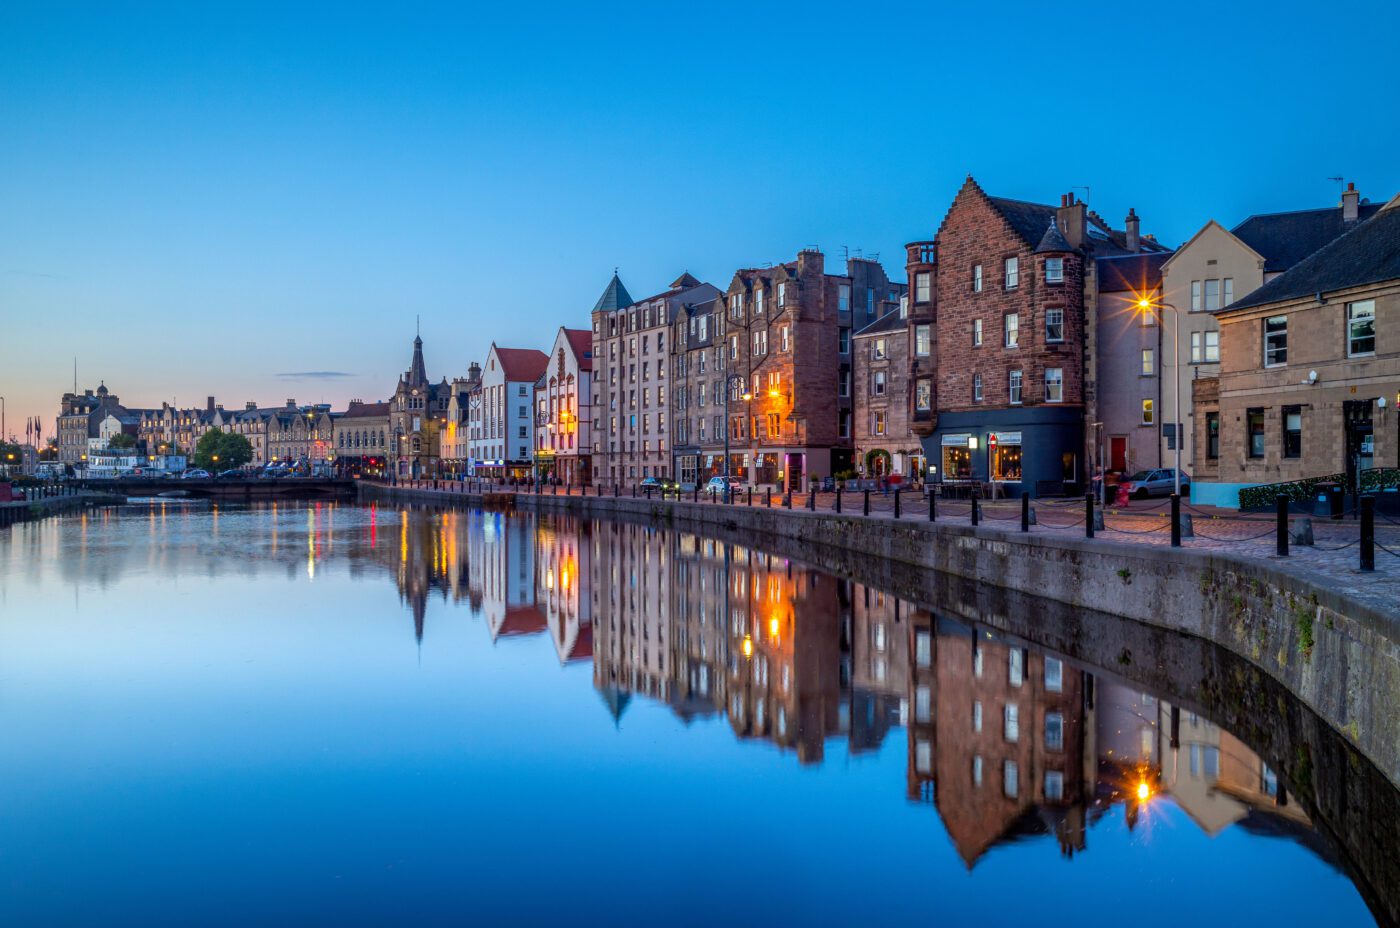 Night view of the shore of Leith by the river